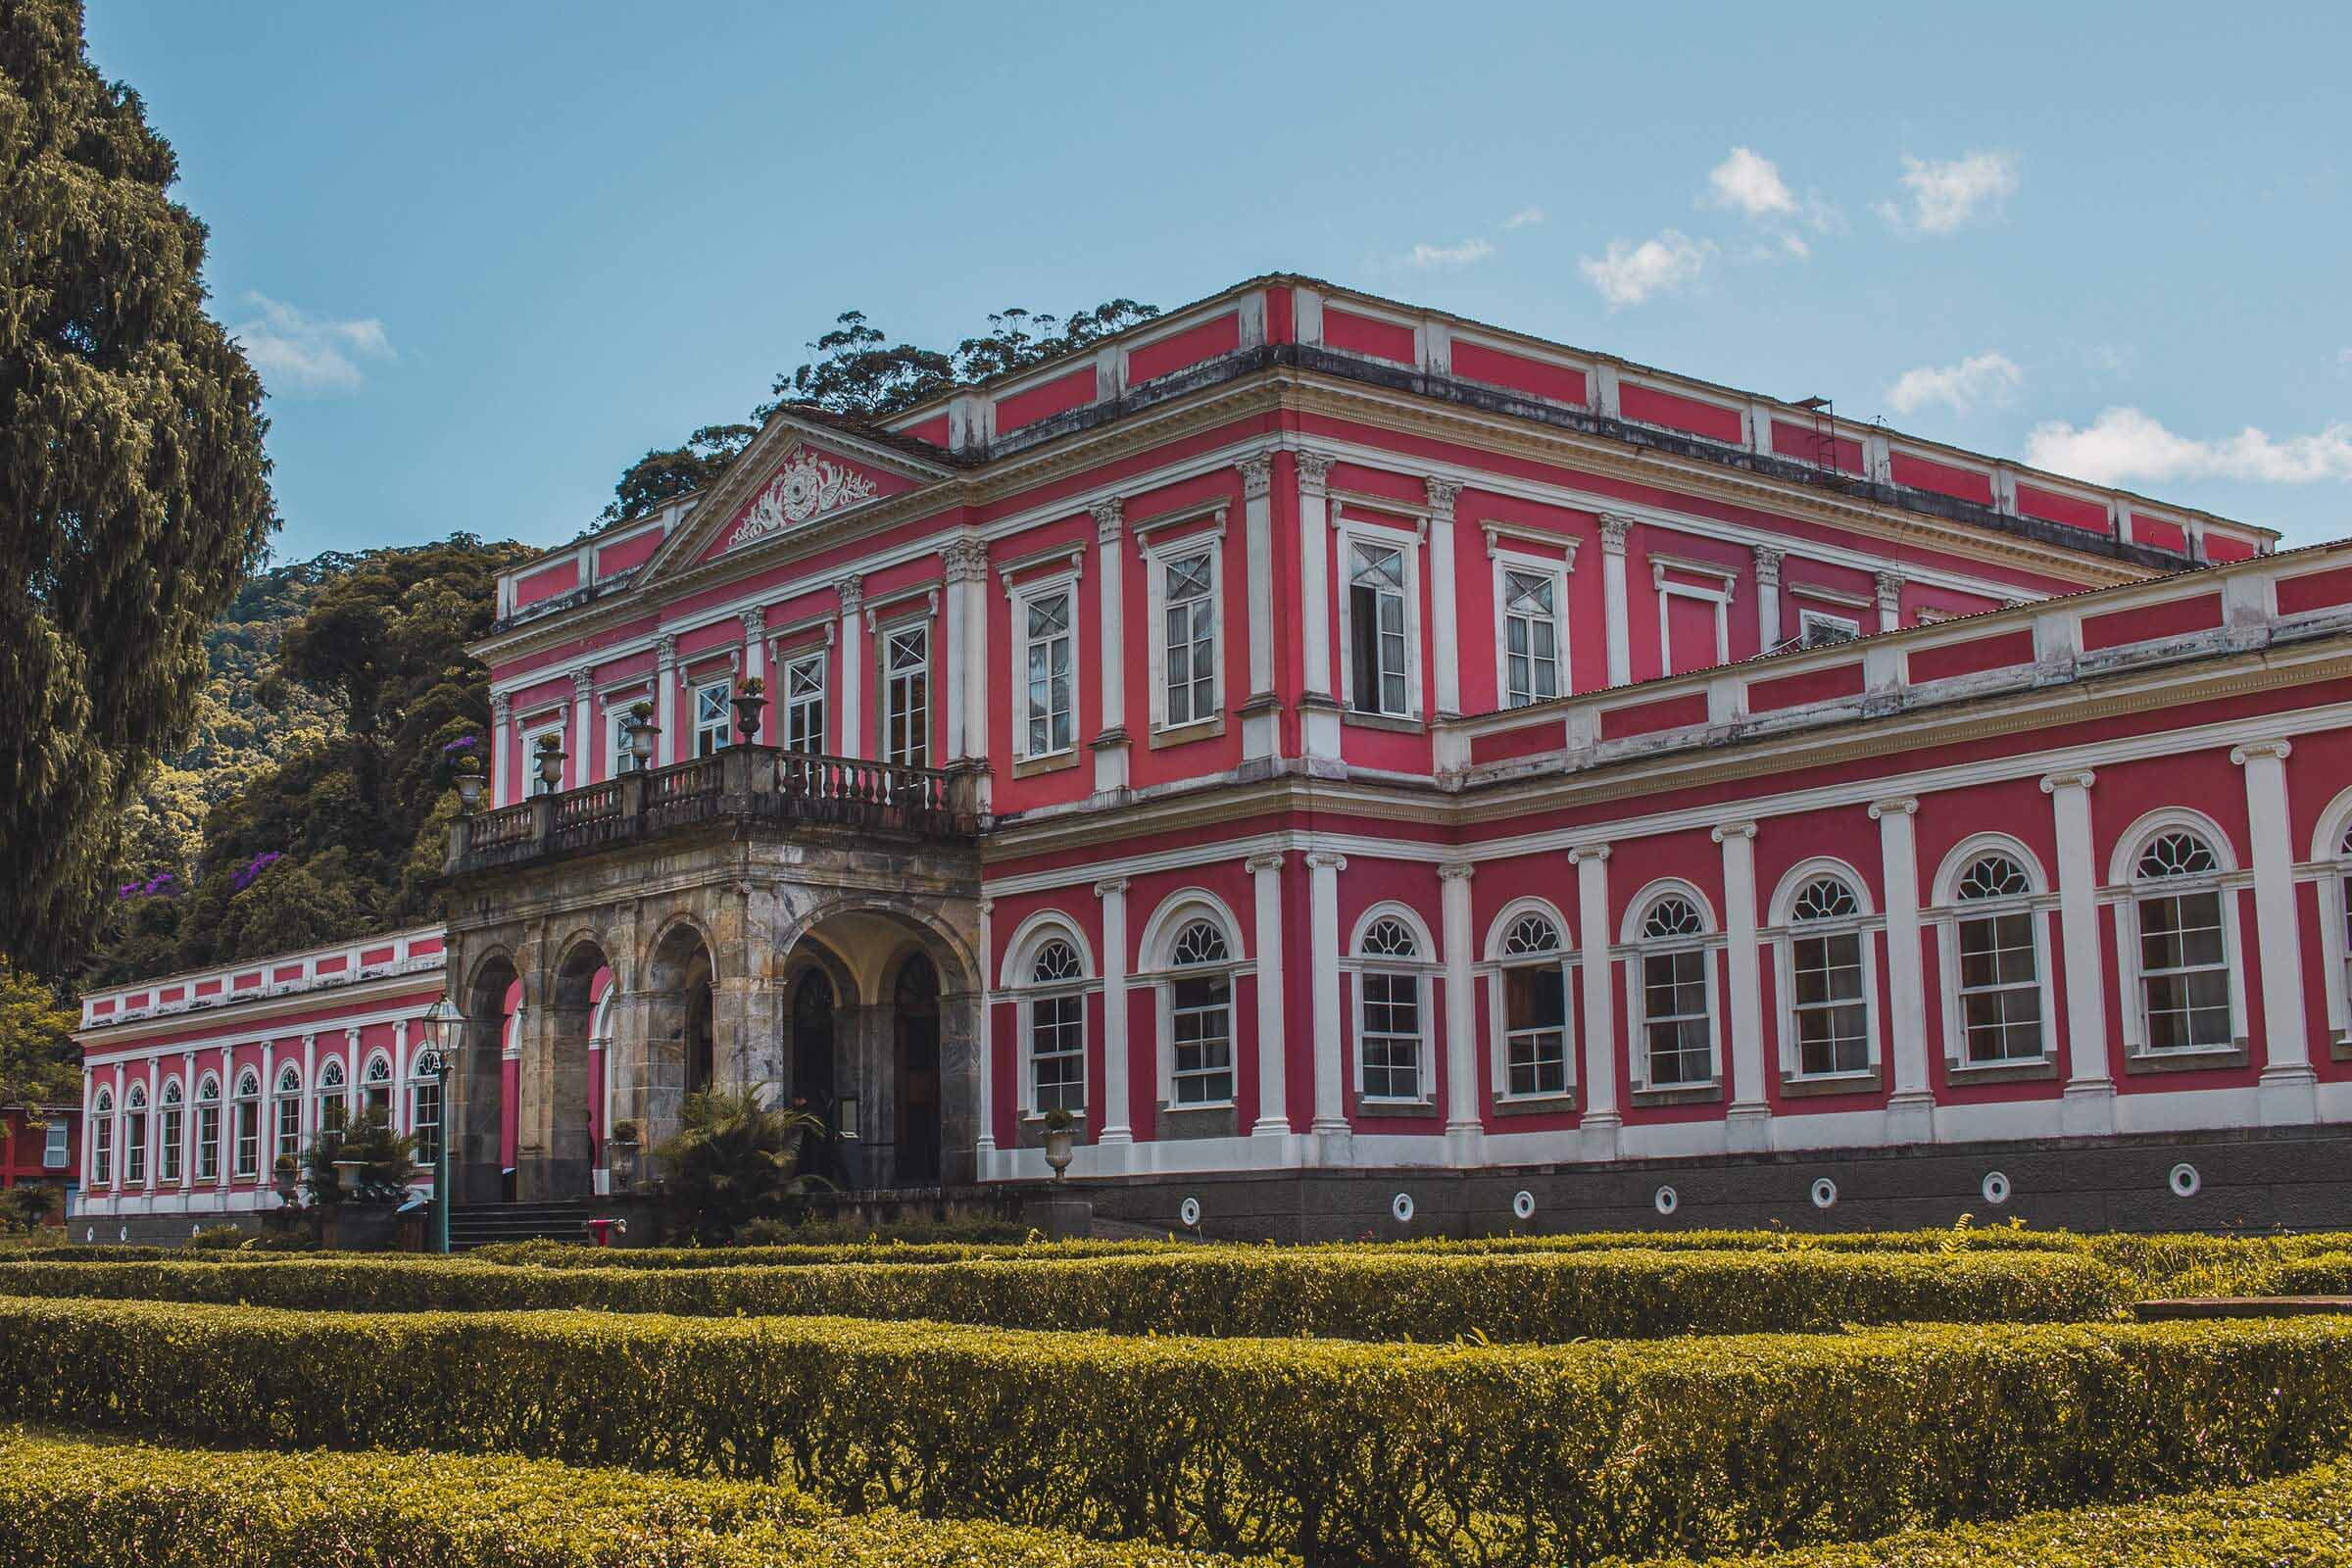 Pétropolis was the summer residence of the Brazilian Emperors and aristocrats in the 19th century.